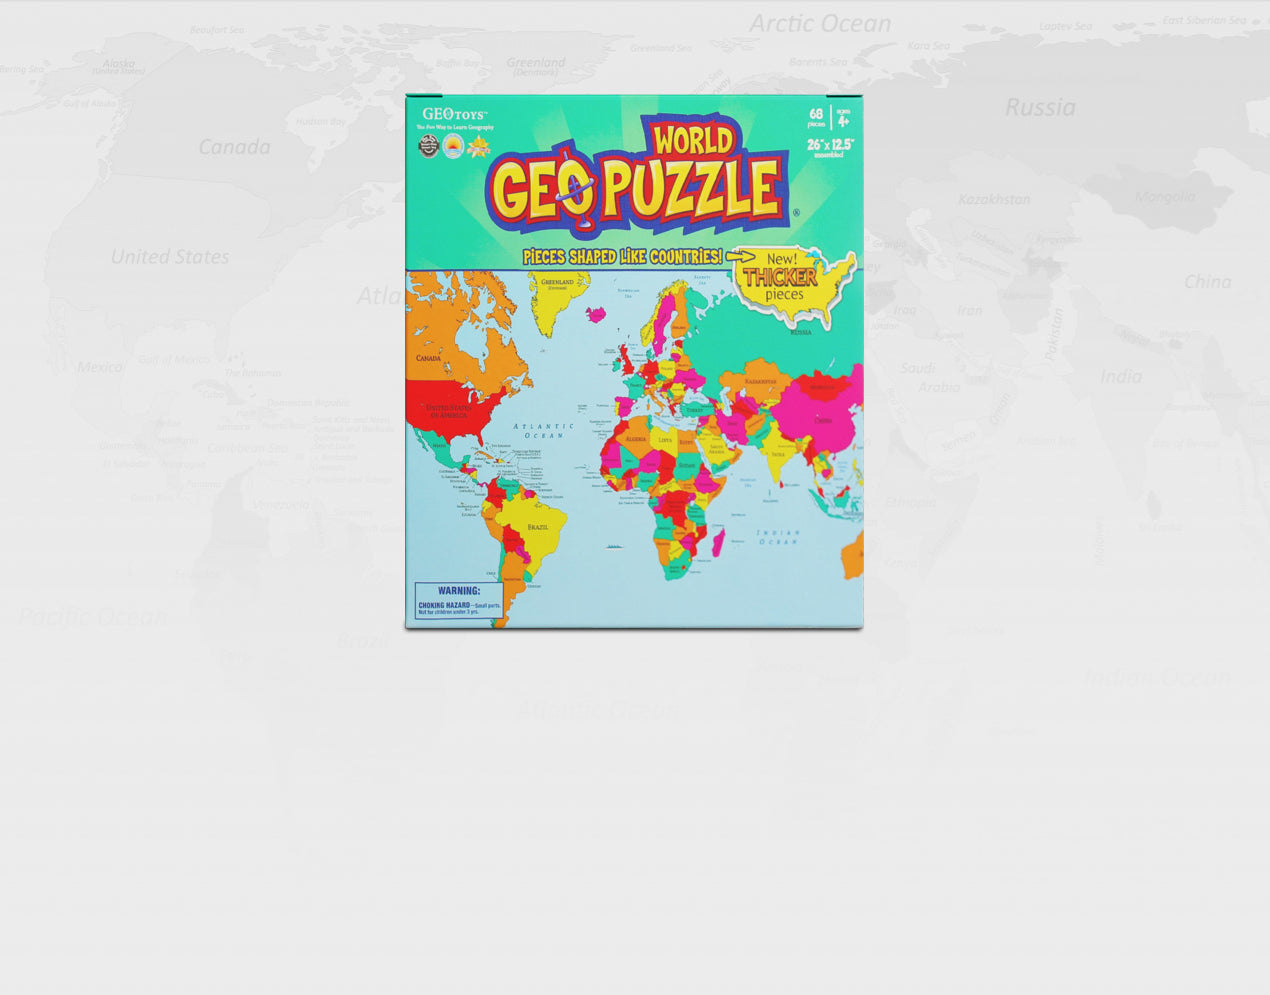 Games,board game,fun game,jigsaw,jigsaw planet,jigsaw puzzle,puzzle,toys,animal toys,trivia,brain game,fun gifts,educational game,piece puzzles,animal puzzle,minded games,learning by games,magnetic puzzle,geography games,tabletop game,world geography game